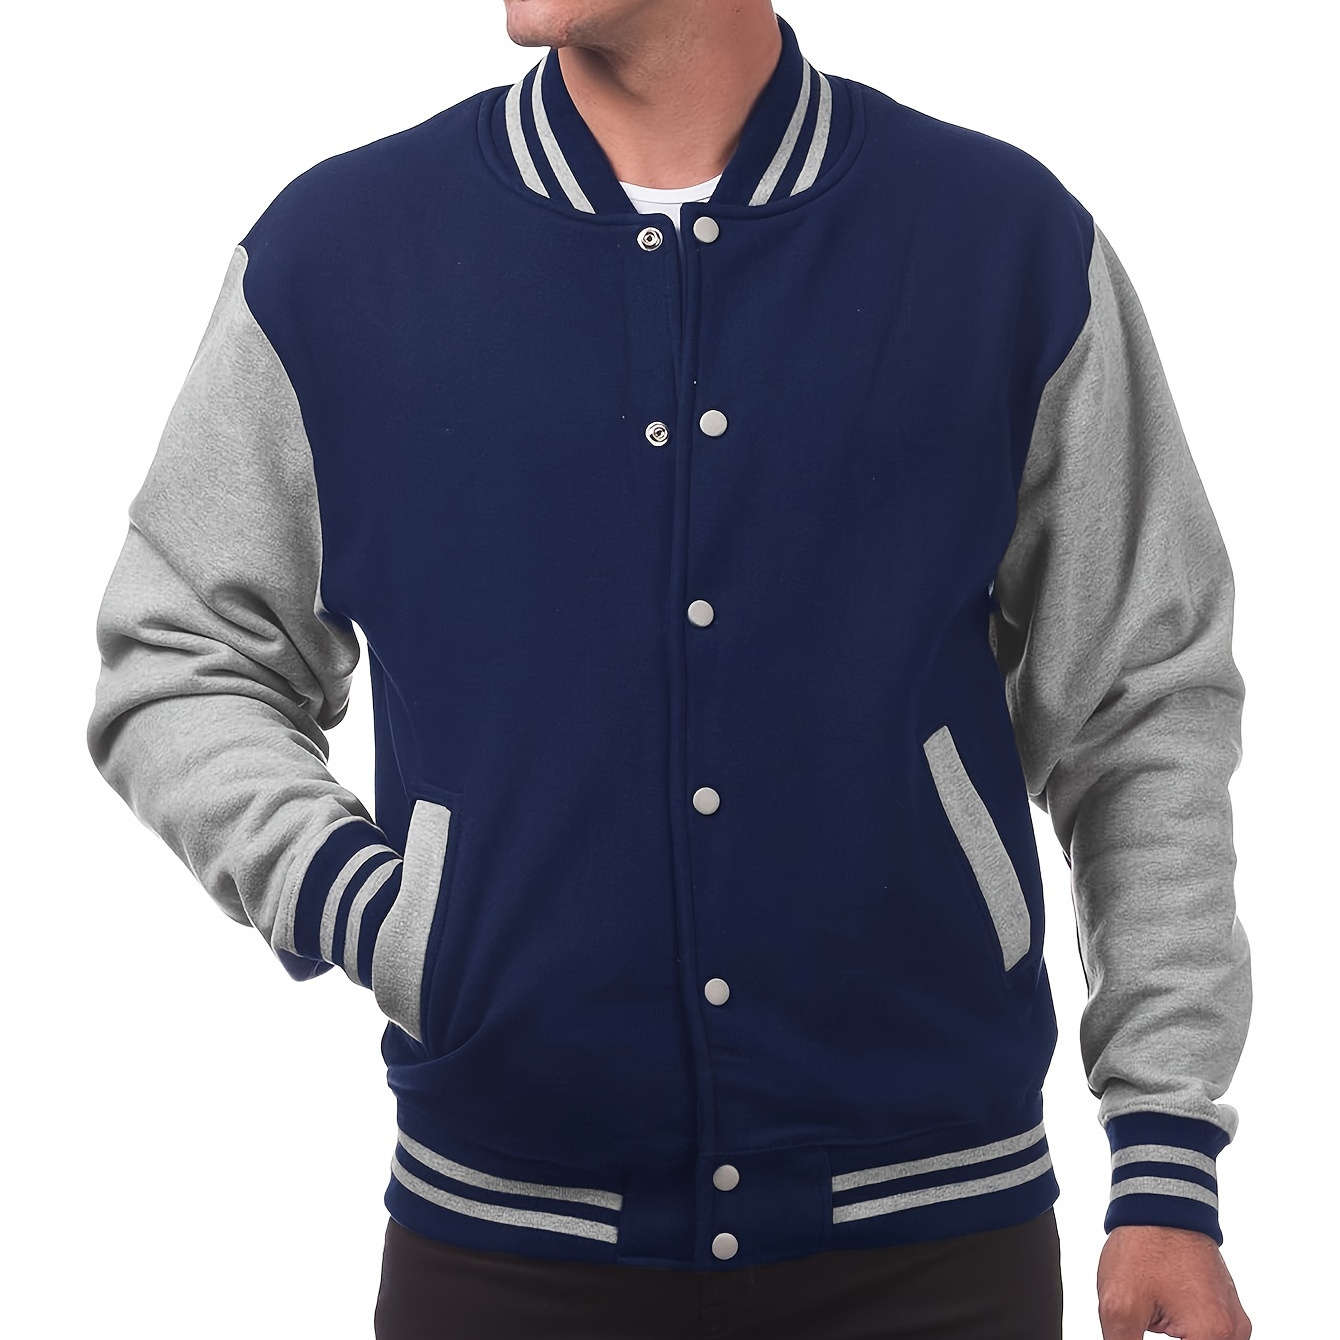 

Men's Varsity Style Contrast Color Long Sleeve And Button Down Baseball Jacket With Stand Collar And Pockets, Chic And Casual Sports Jacket For Spring And Autumn Outdoors Activities